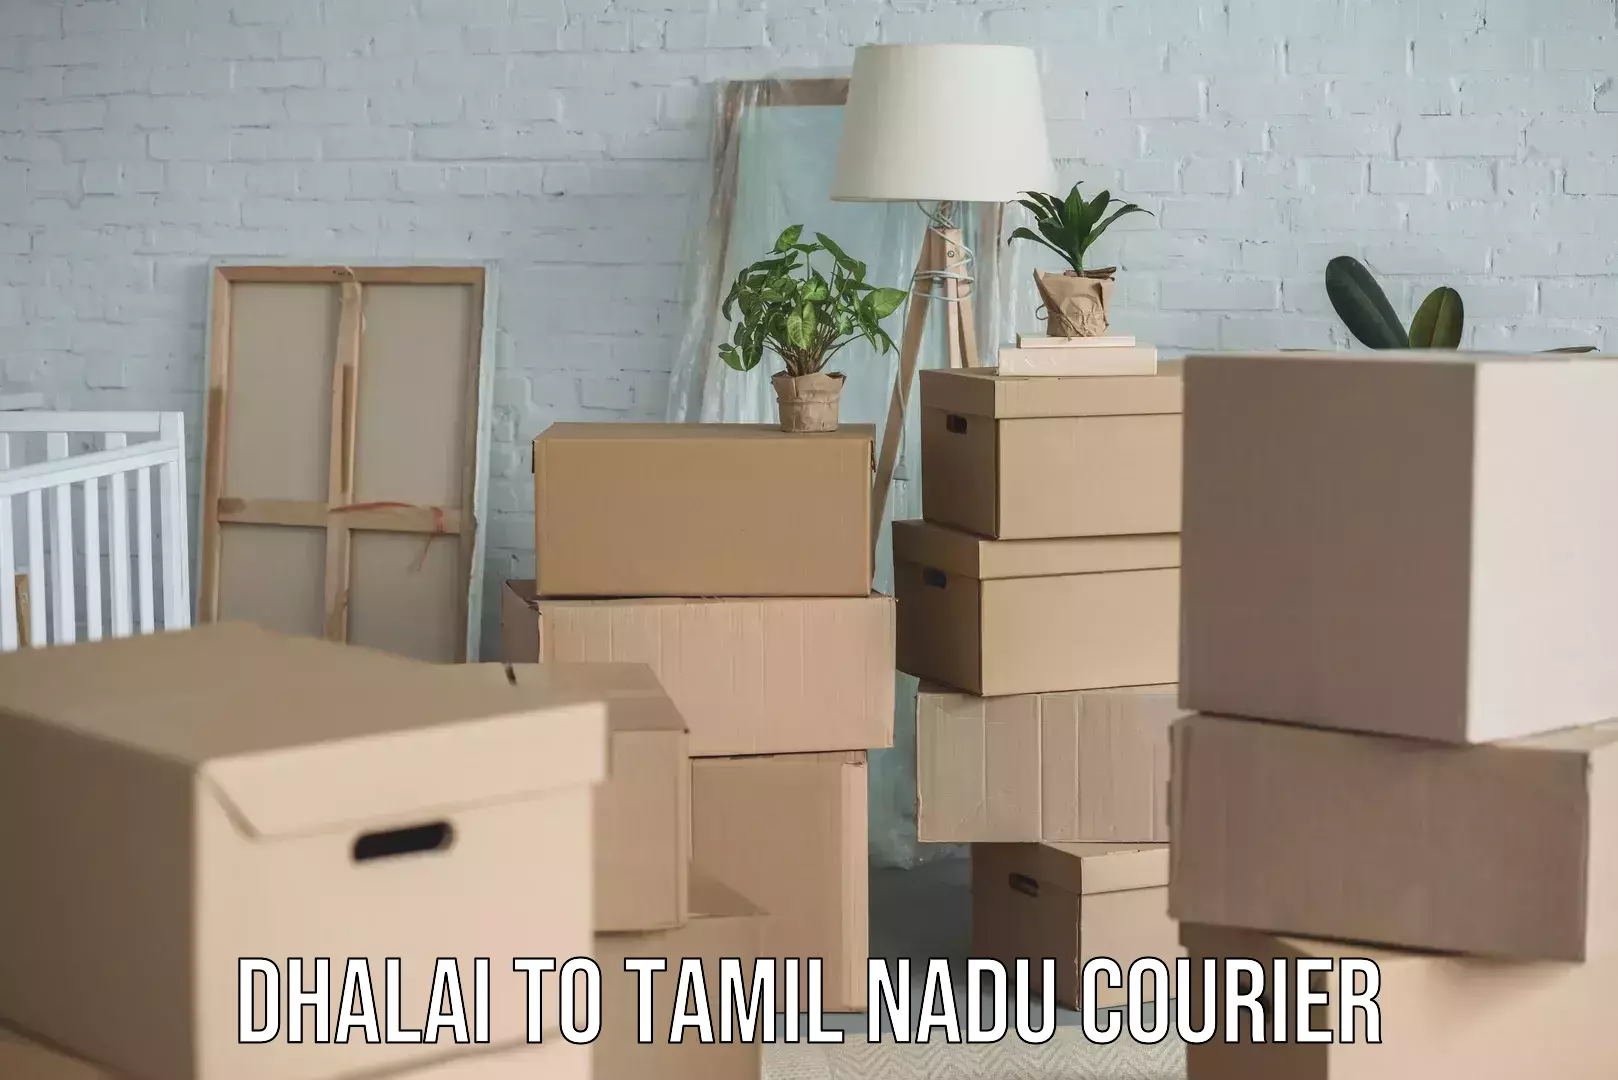 Parcel service for businesses Dhalai to Tamil Nadu